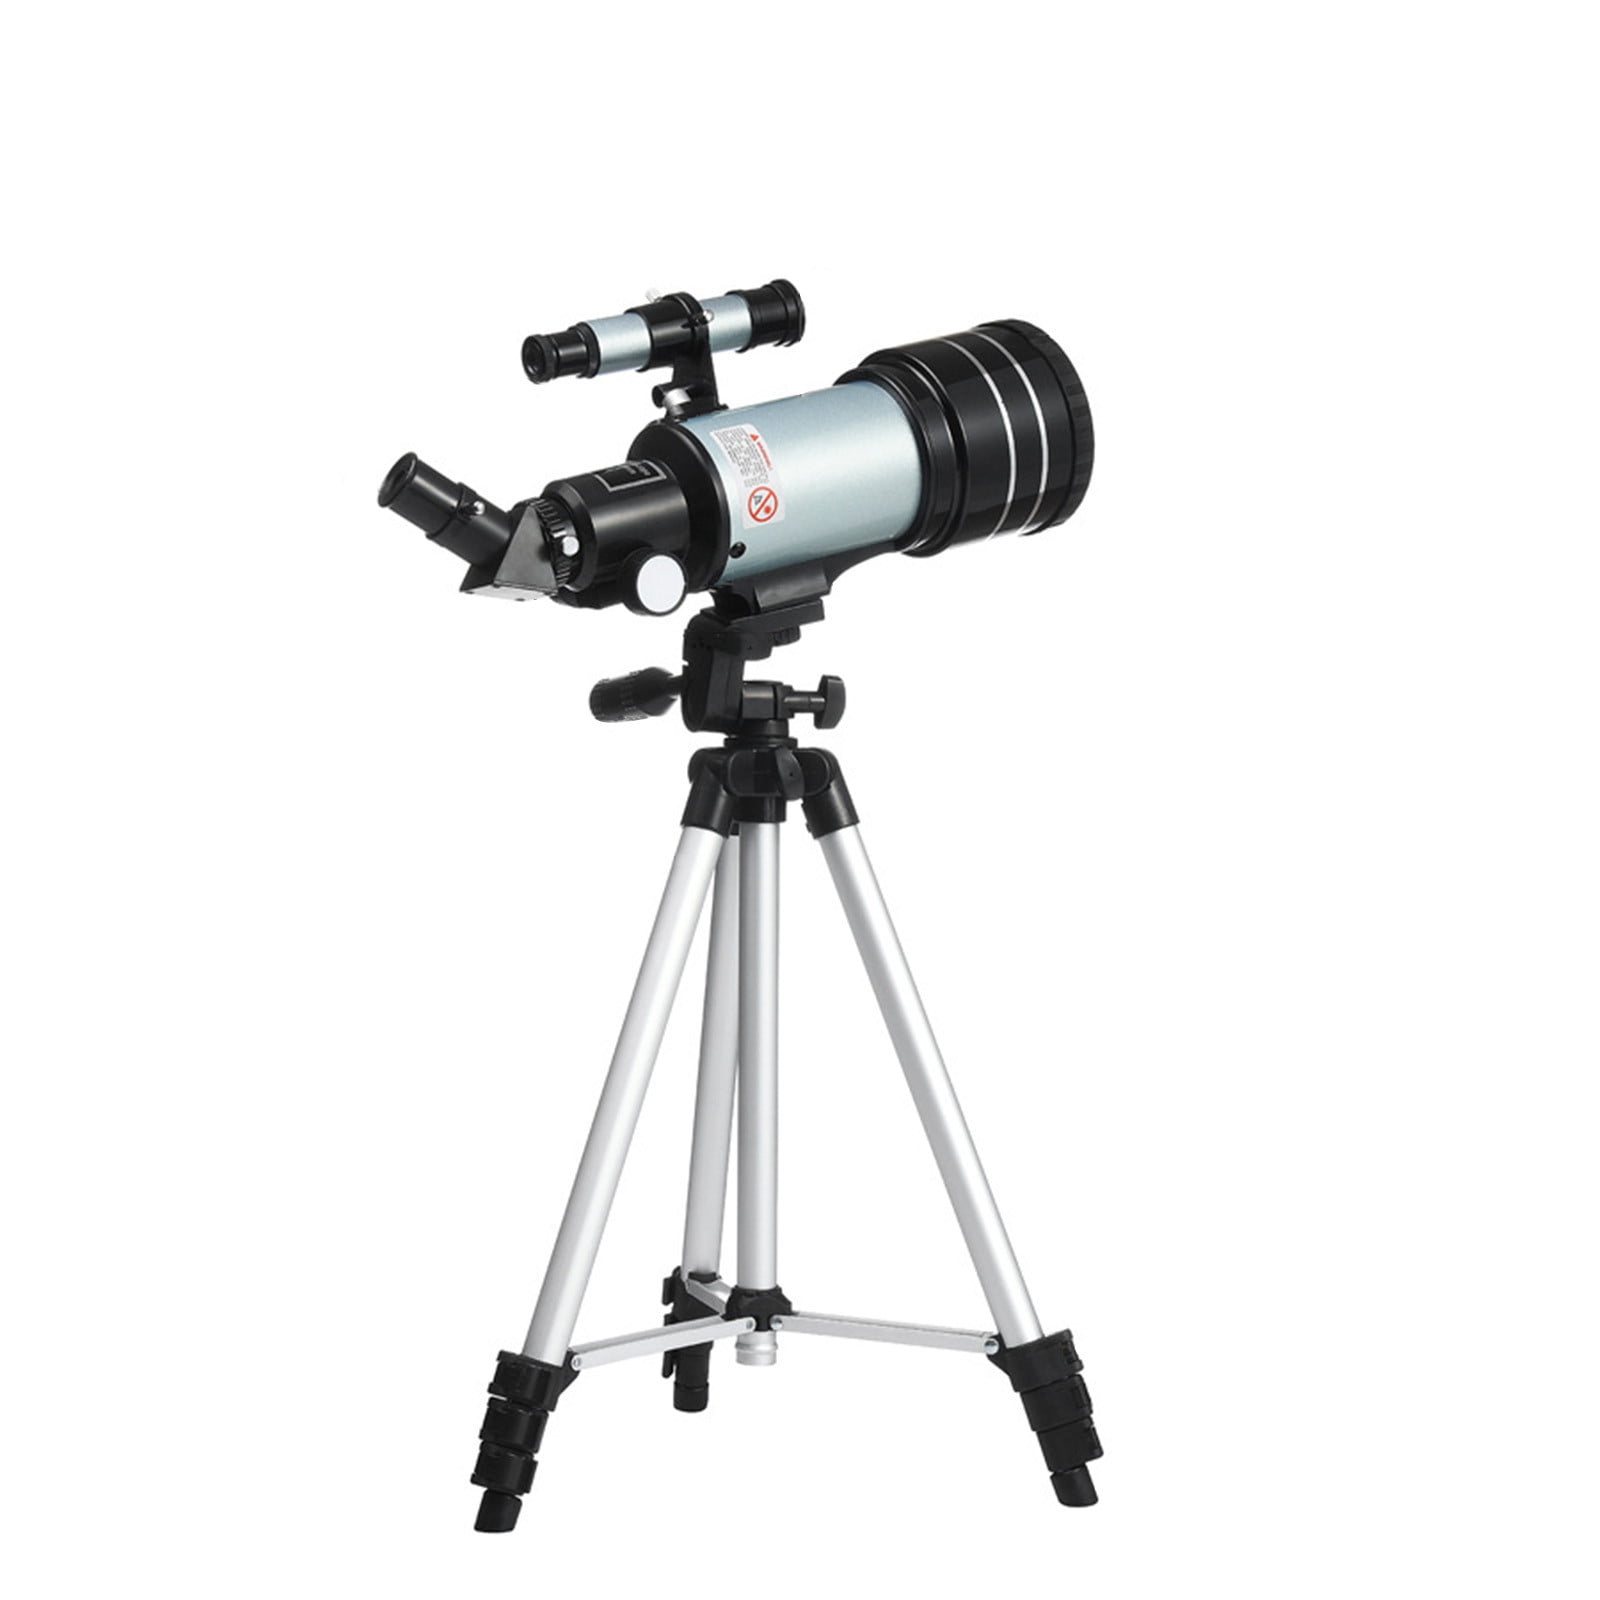 70mm Aperture Astronomy Beginners Telescopes with F30070 High Bracket Professional Stargazing High Definition Night Vision Entry Telescope Shirt Luv Astronomy Telescopes for Adults & Kids White 